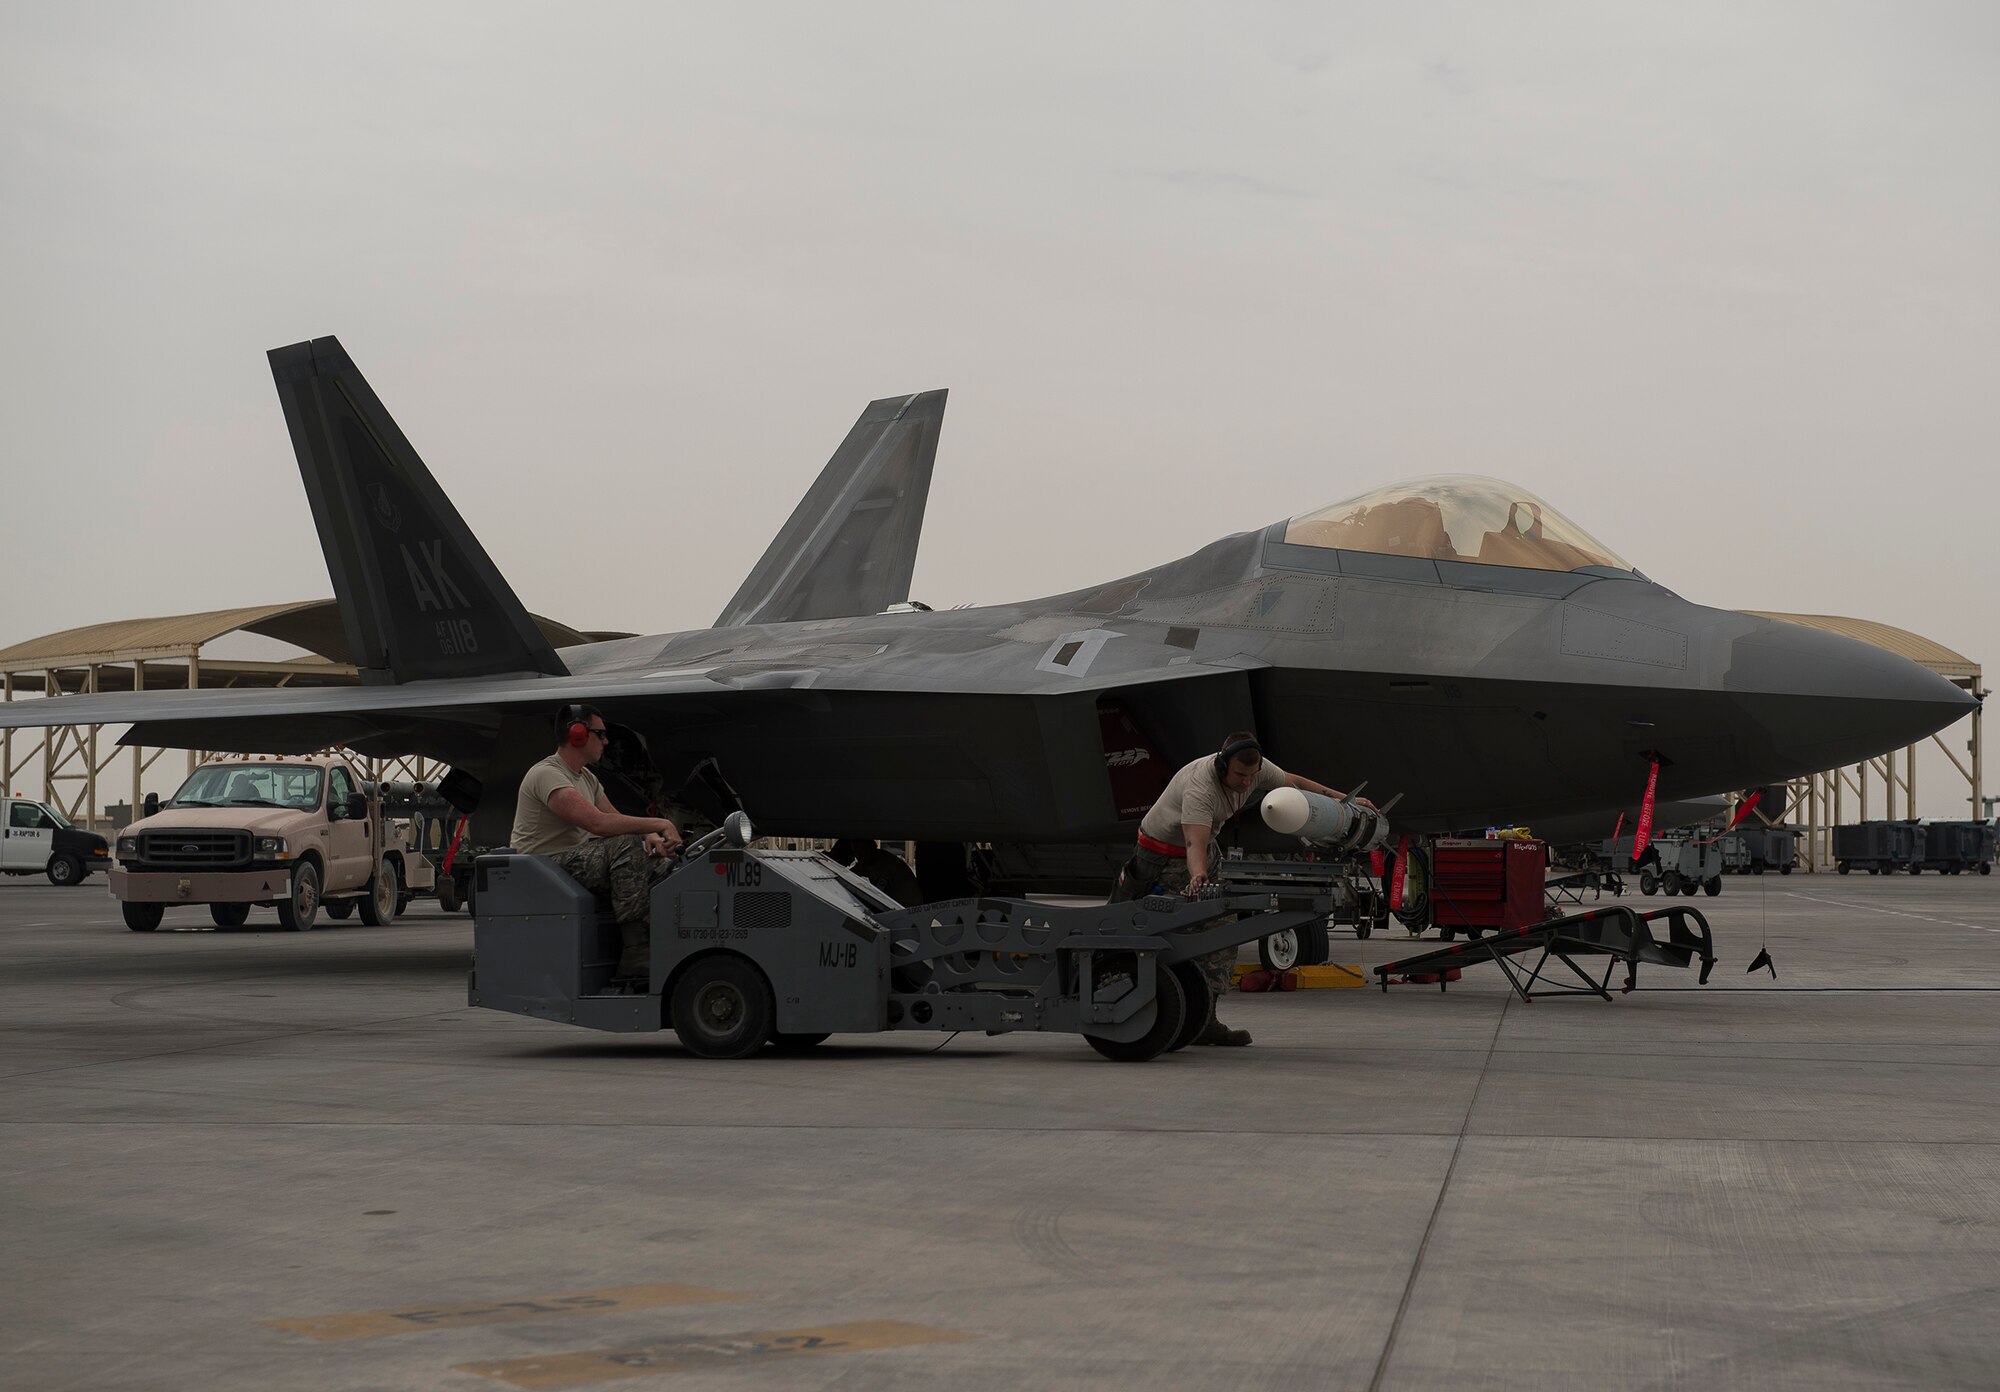 380th Air Expeditionary Wing Airmen download weapons from an F-22A Raptor at an undisclosed location in Southwest Asia April 14, 2016. The current group of Raptors employs the most up-to-date software and hardware package, allowing it to carry a wider range of munitions. (U.S. Air Force Photo by Staff Sgt. Chad Warren/Released)